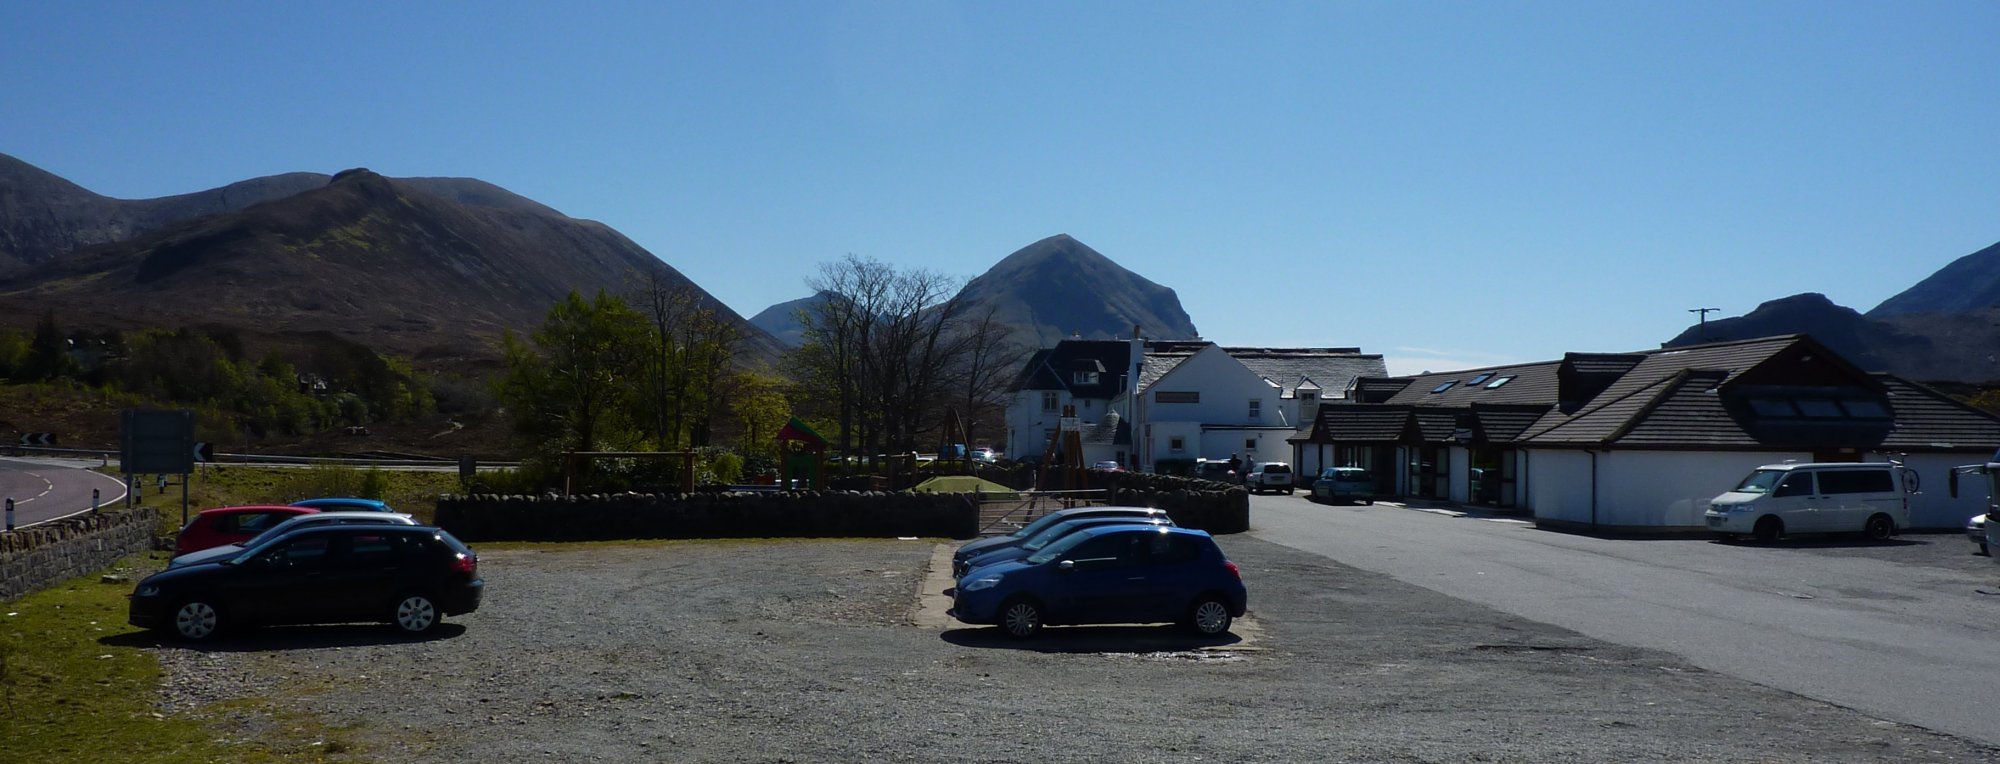 Arrival at the Sligachan Hotel and time for a cold Irn Bru while I wait for Rog to return to the car